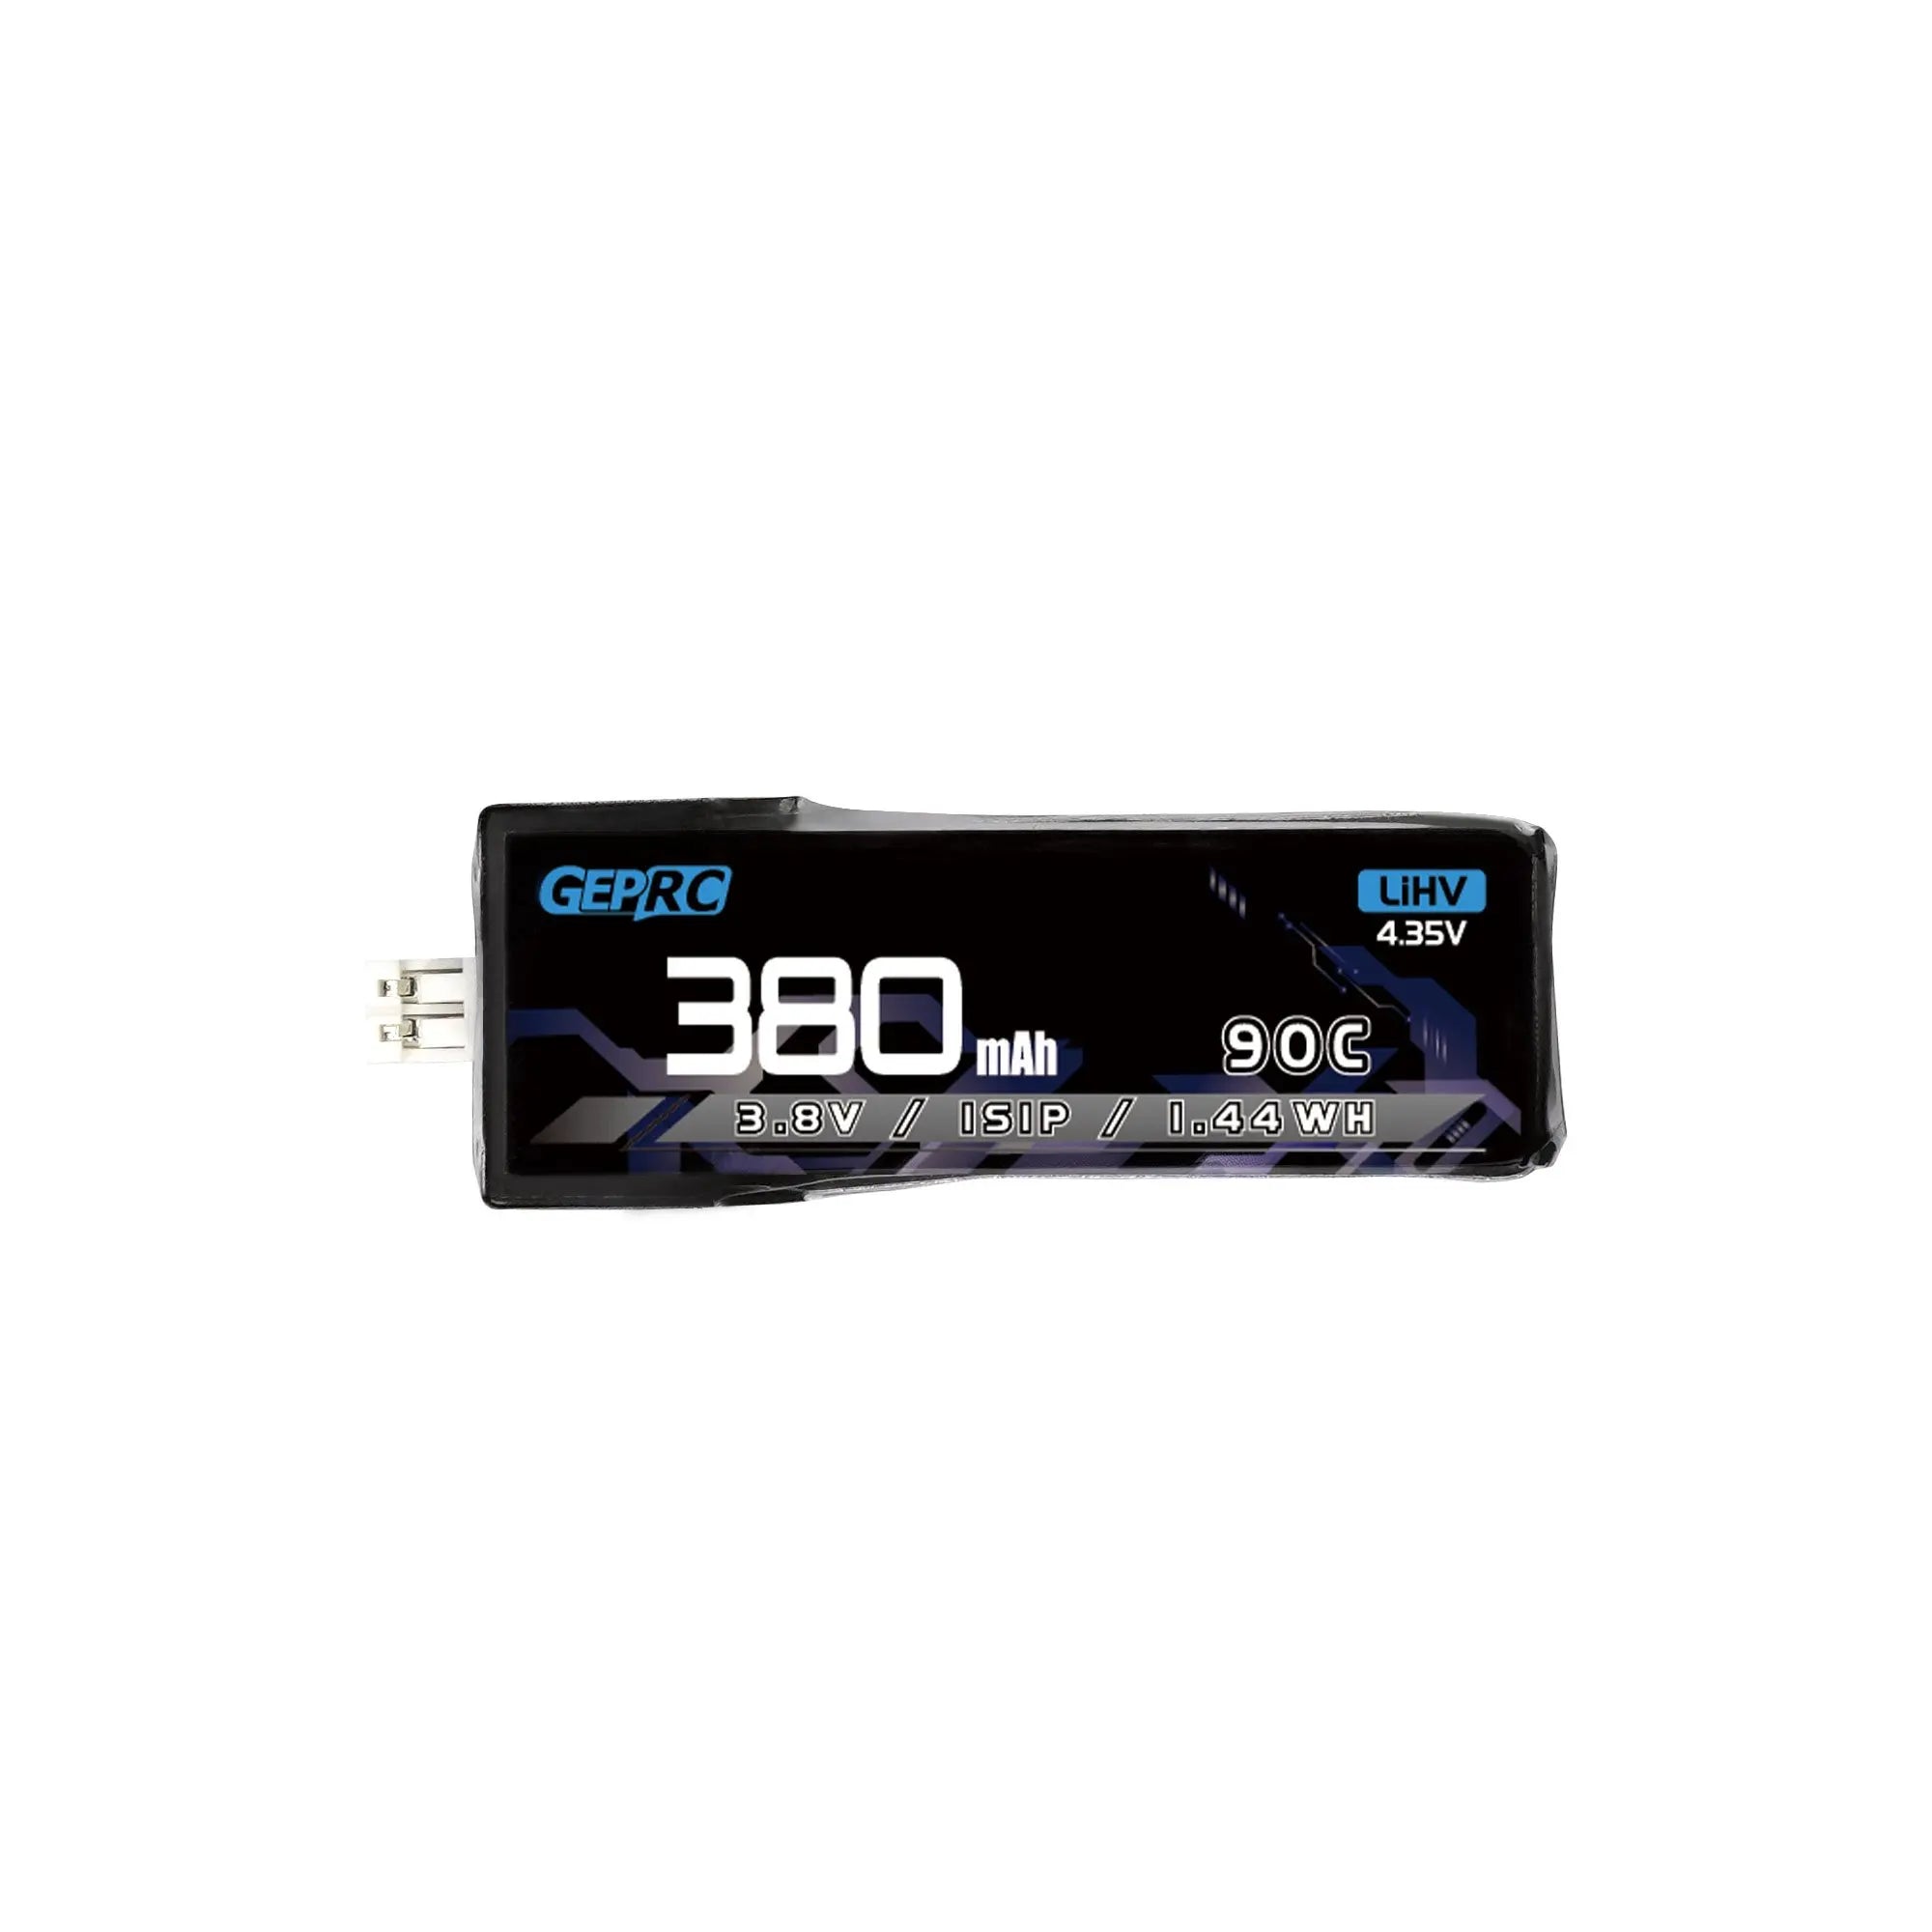 GEPRC 1S 380mAh 90C Battery, the full charge voltage of single cell of LiPo battery is not more than 4.2V